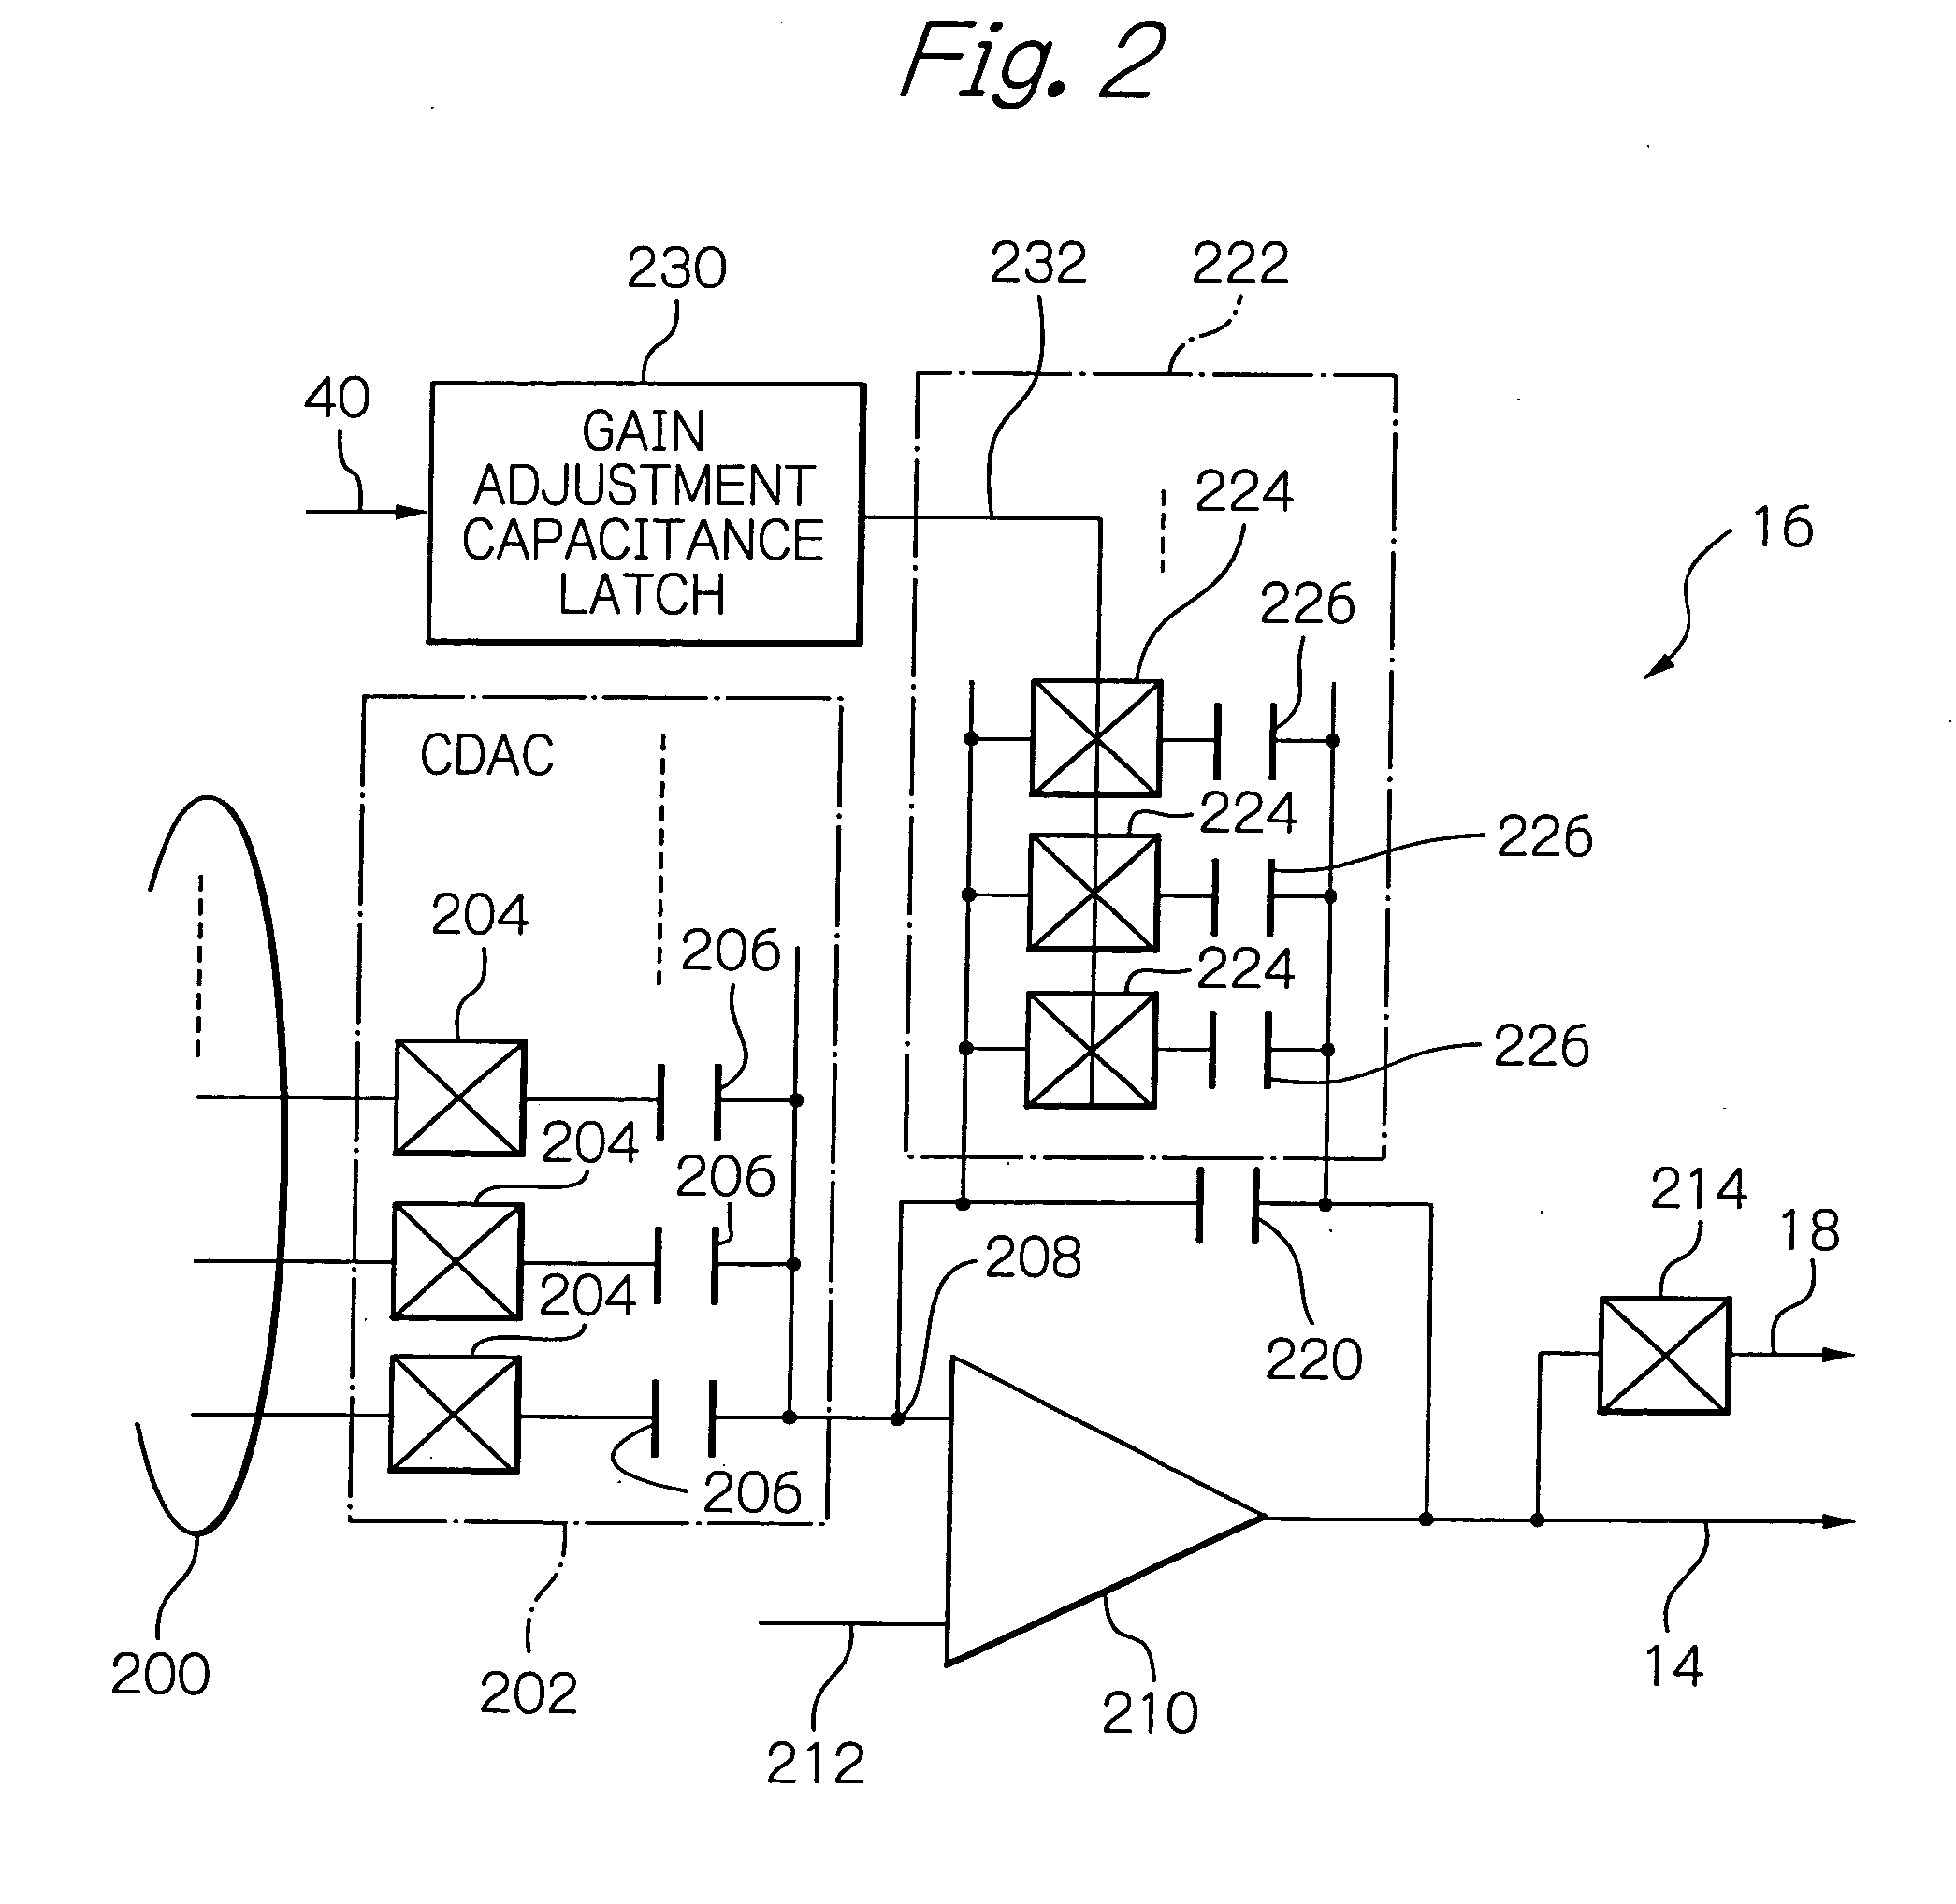 Offset canceller for compensating for offset in signal output